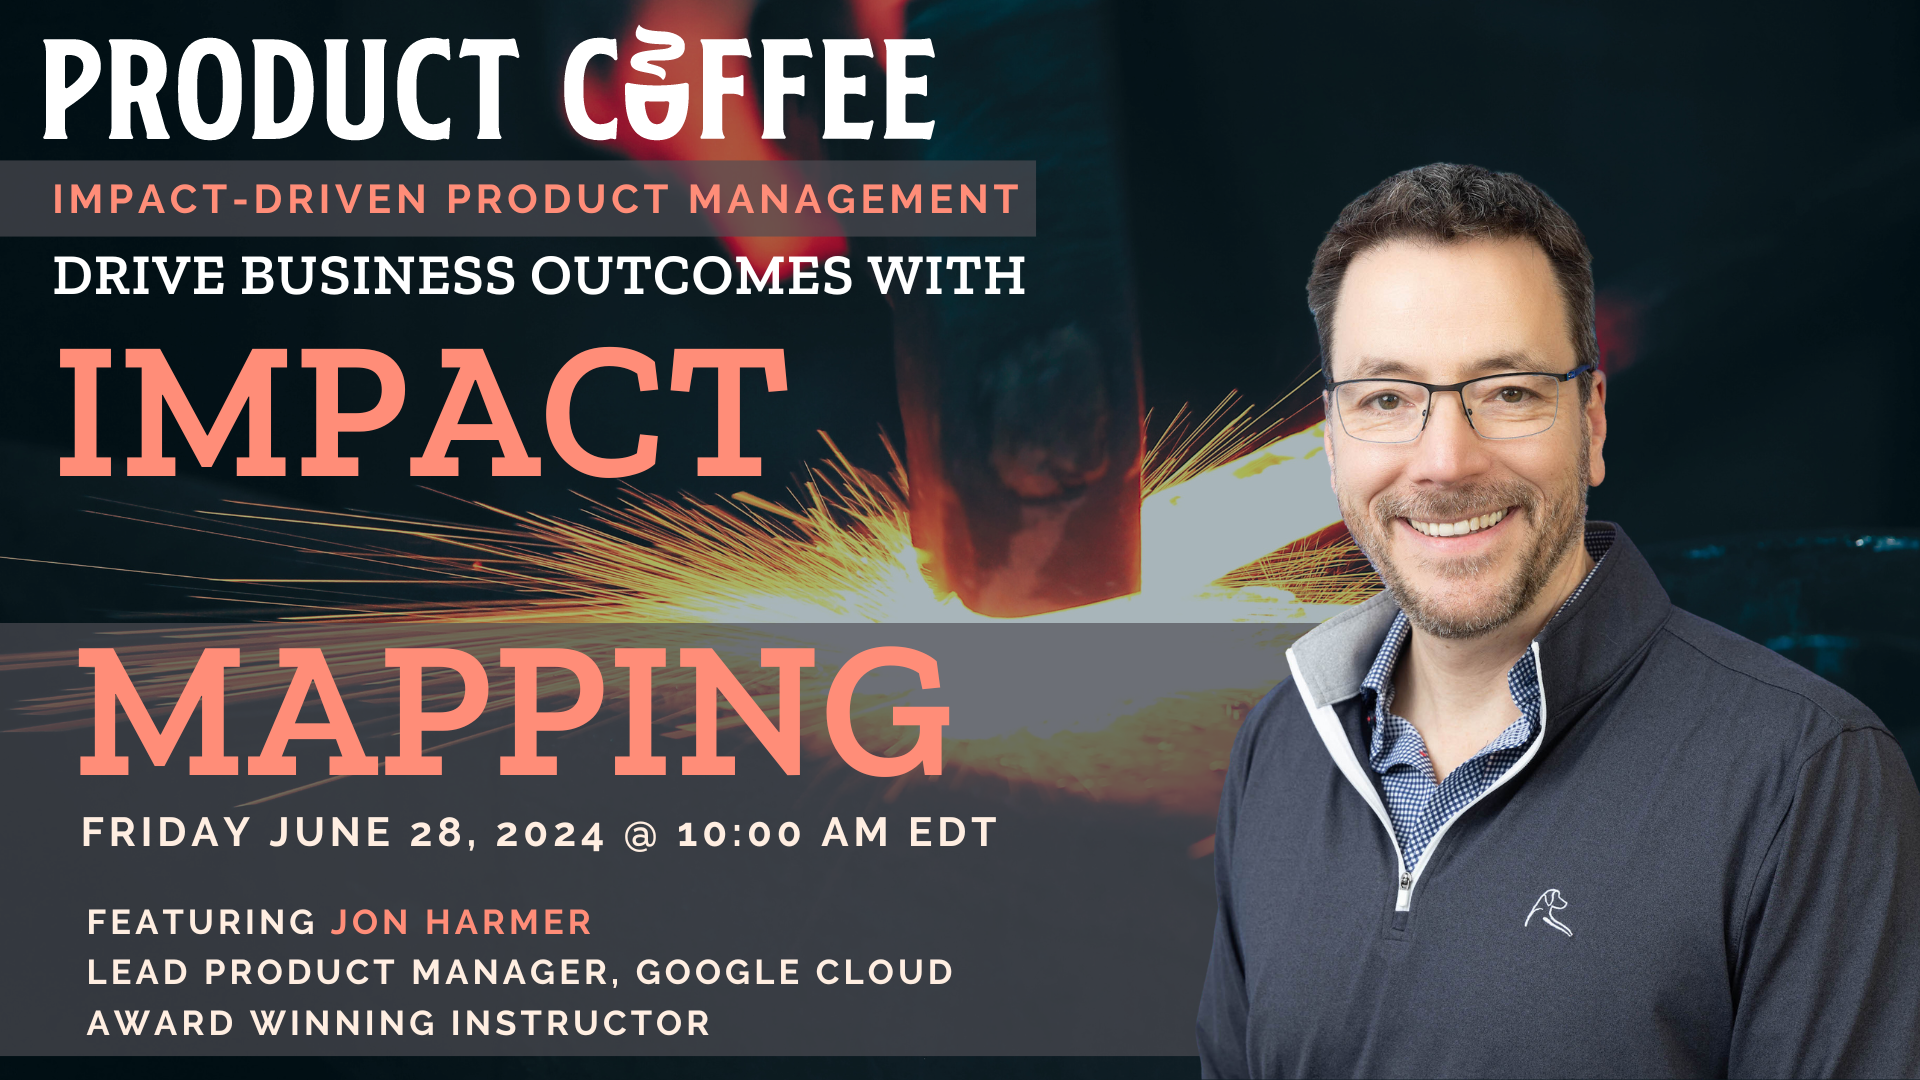 Product Coffee Impact-Driven Product Management Impact Mapping Workshop